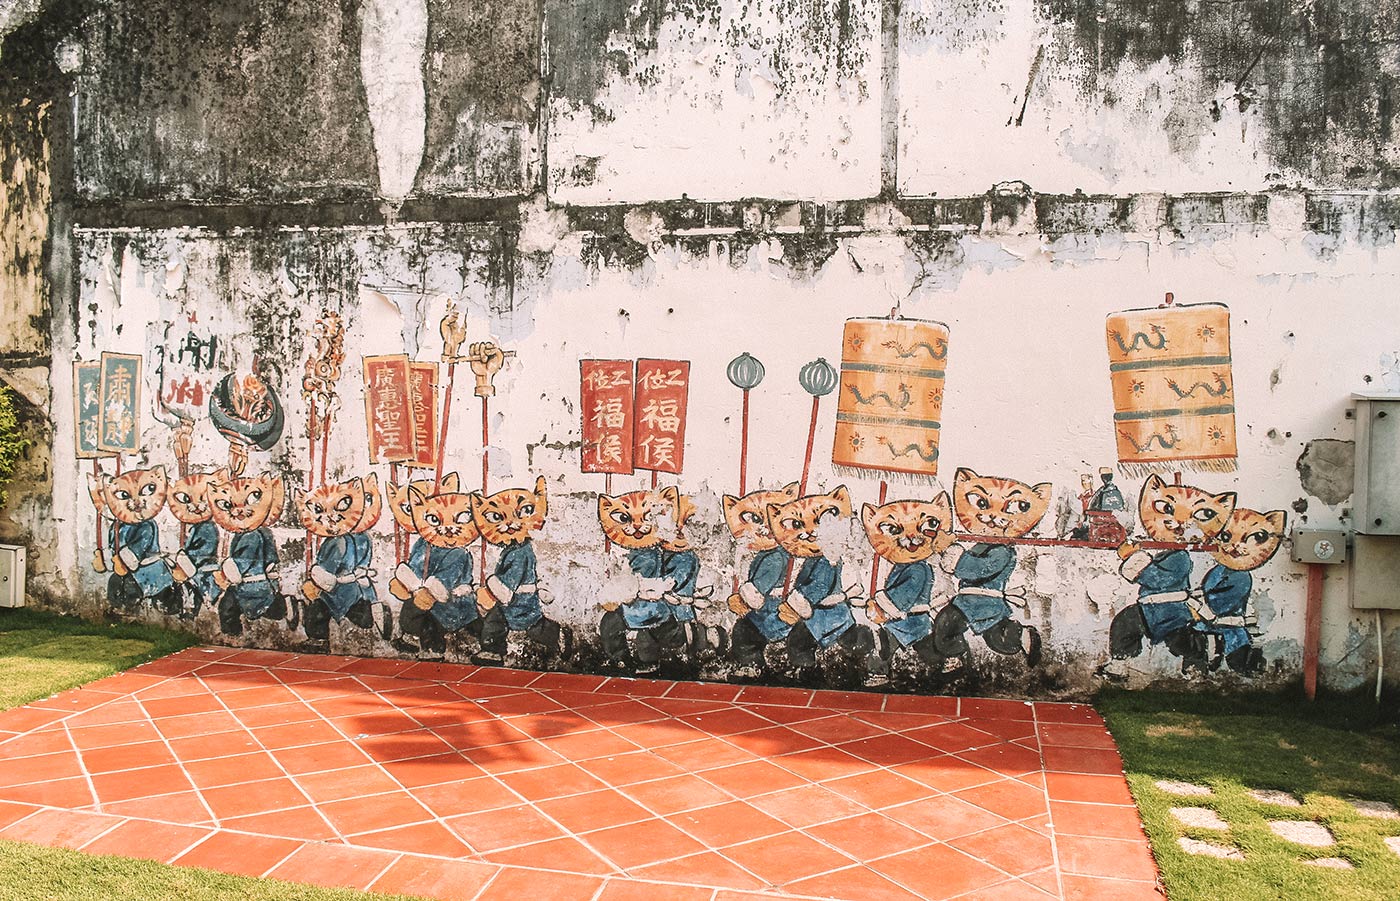 A travel guide to Georgetown street art in Penang, Malaysia blog post